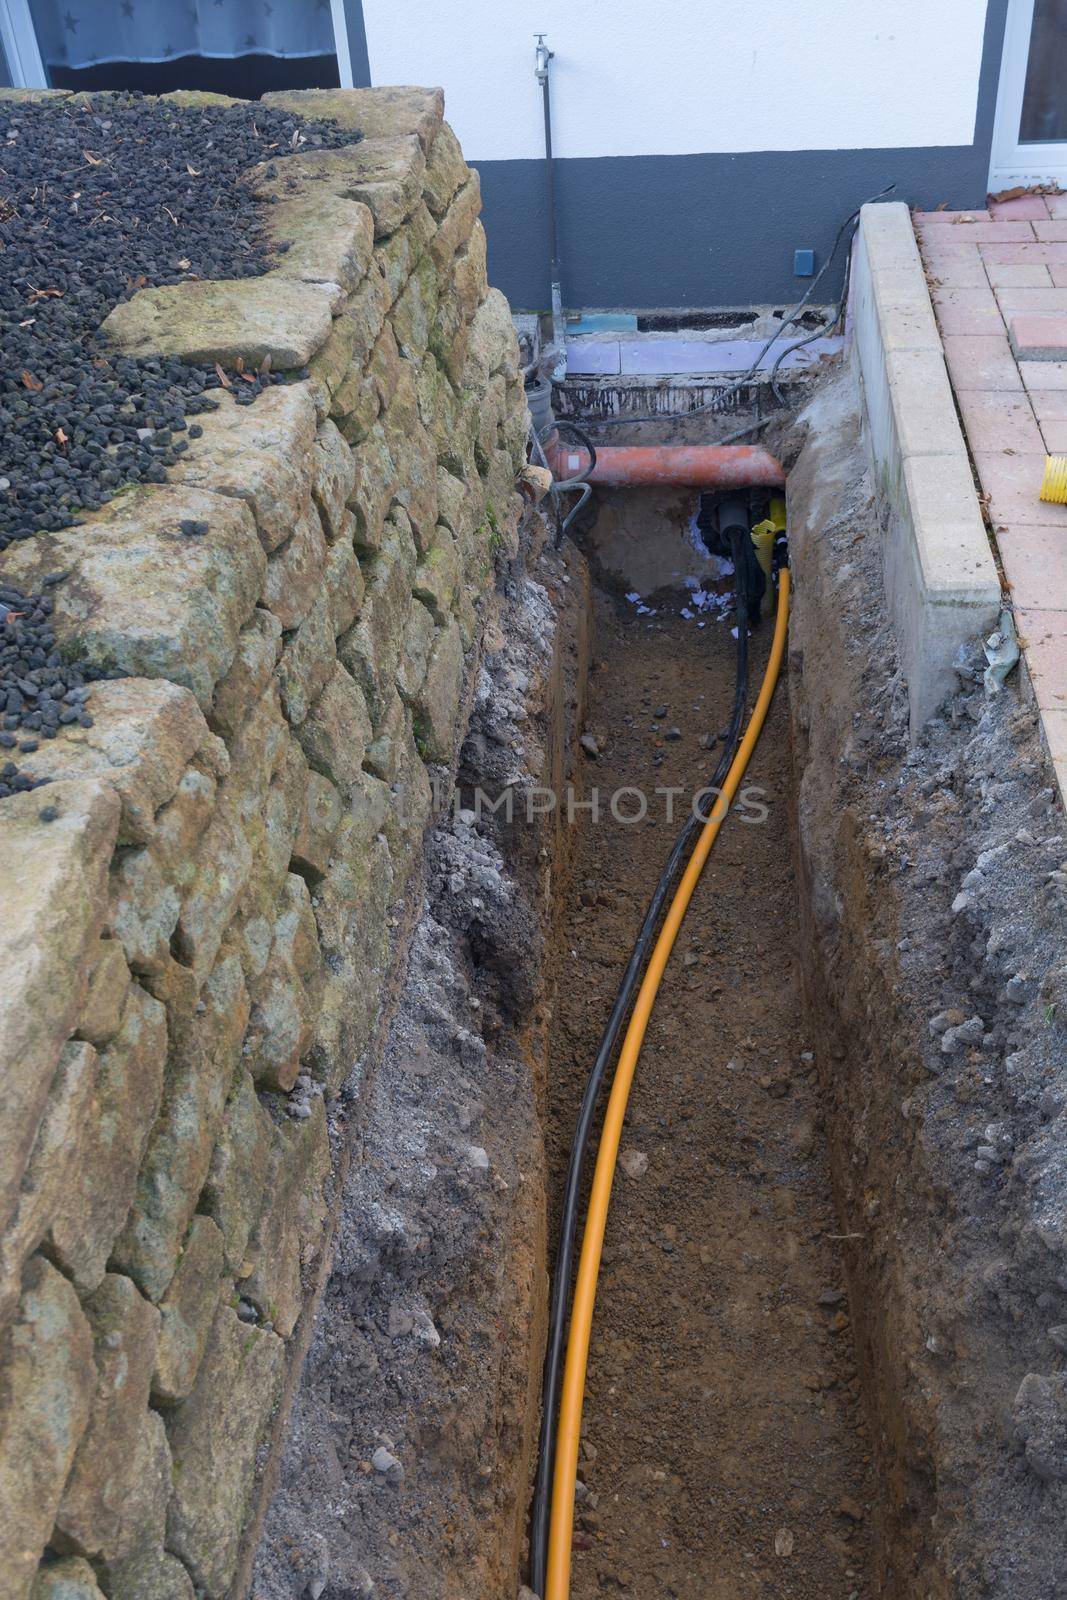 Installation of gas, water and power lines     by JFsPic